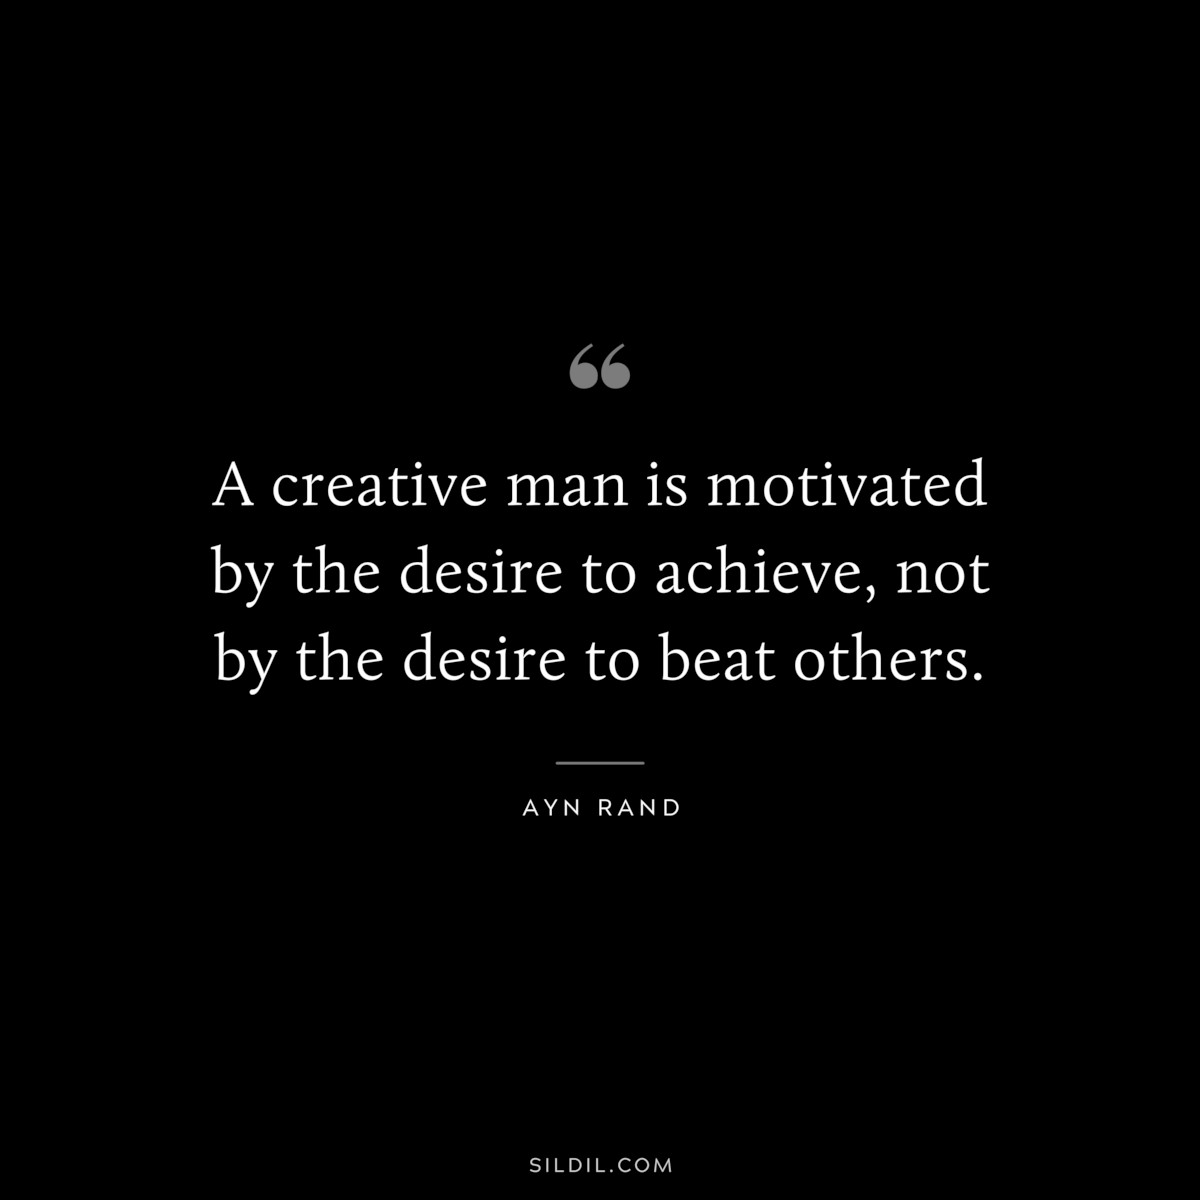 A creative man is motivated by the desire to achieve, not by the desire to beat others. ― Ayn Rand